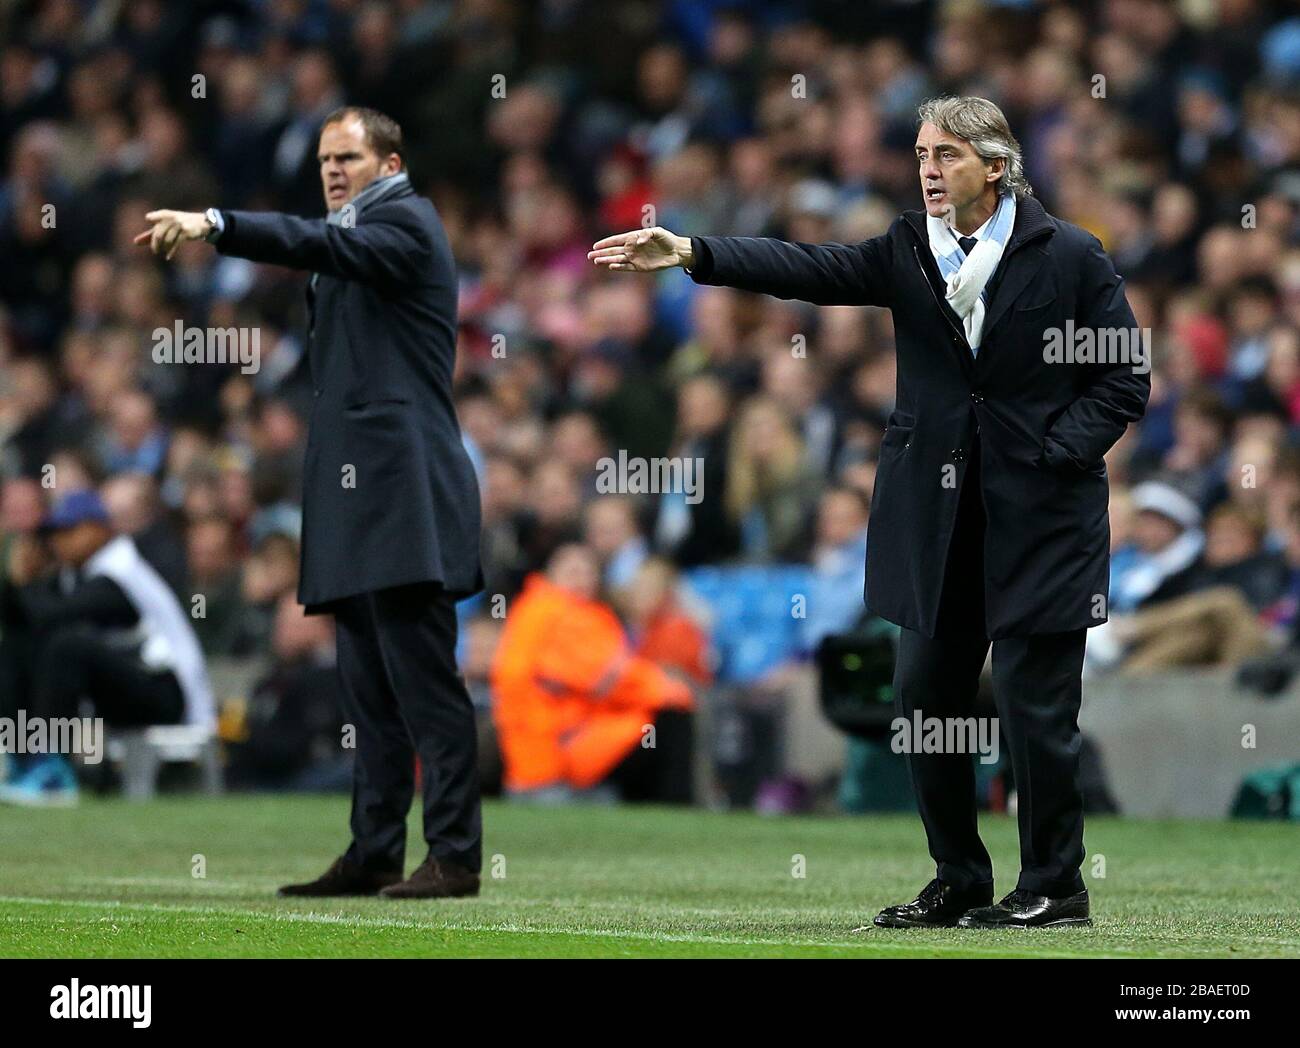 Manchester City manager Roberto Mancini (right) and Ajax manager Frank De Boer on the touchline Stock Photo